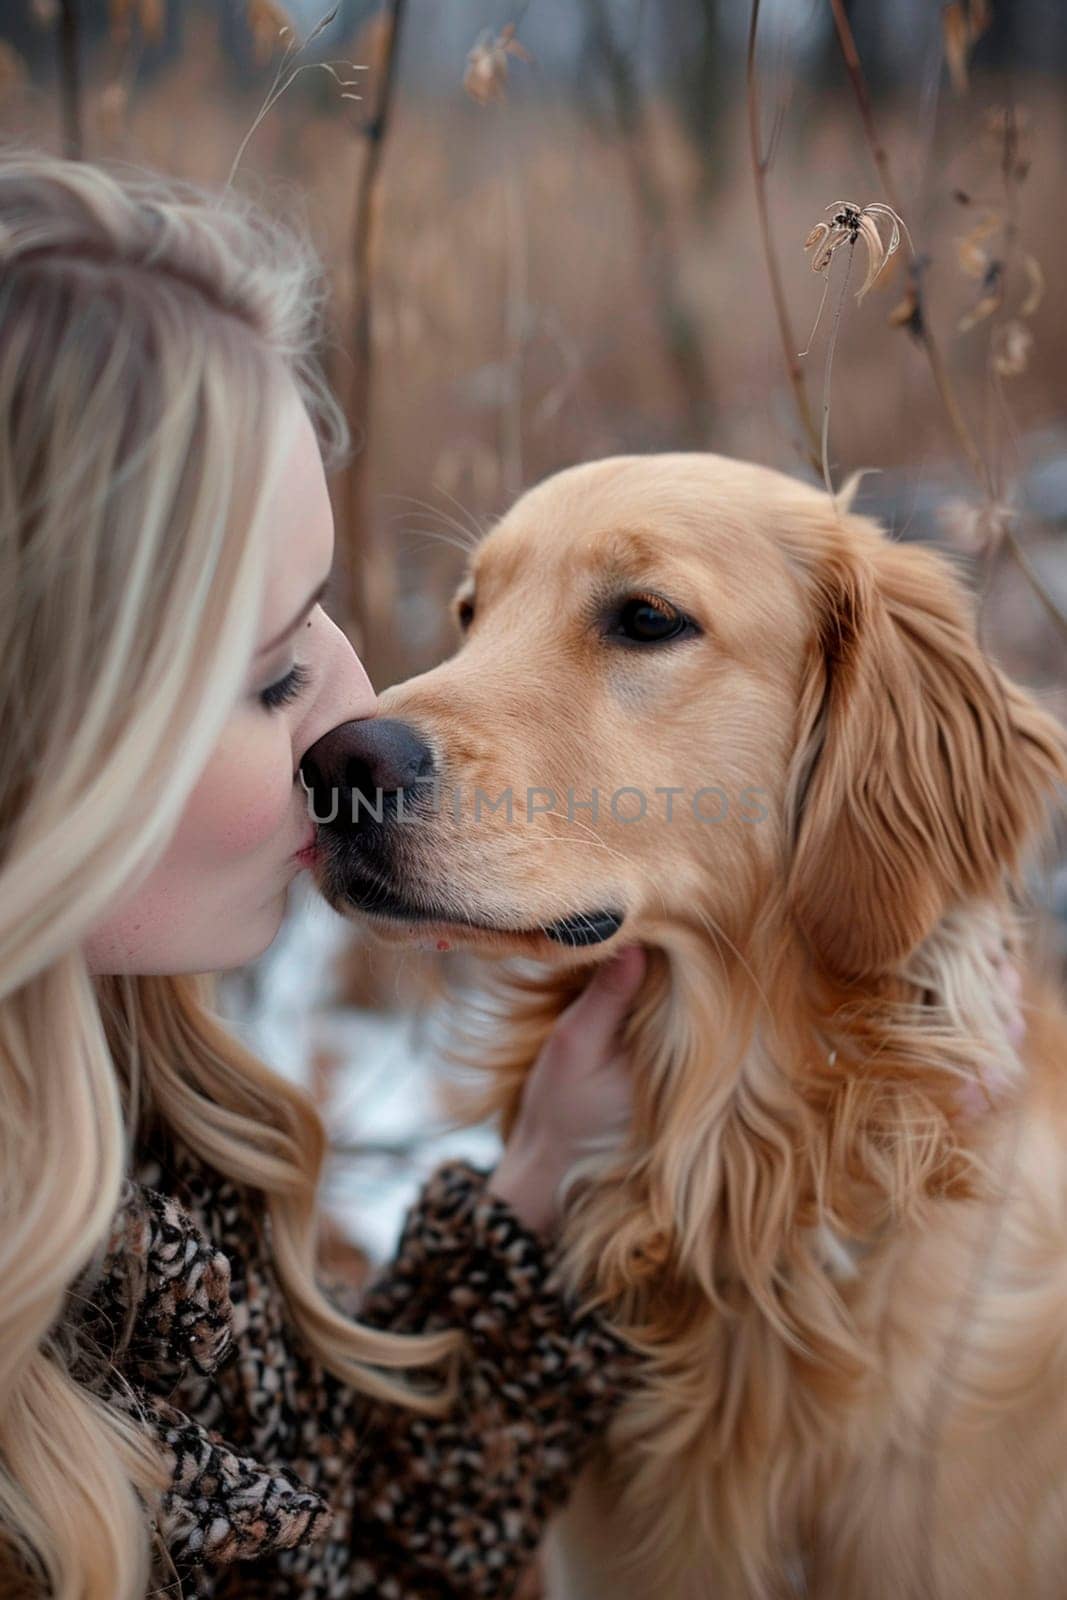 the owner kisses the dog. Selective focus. people.